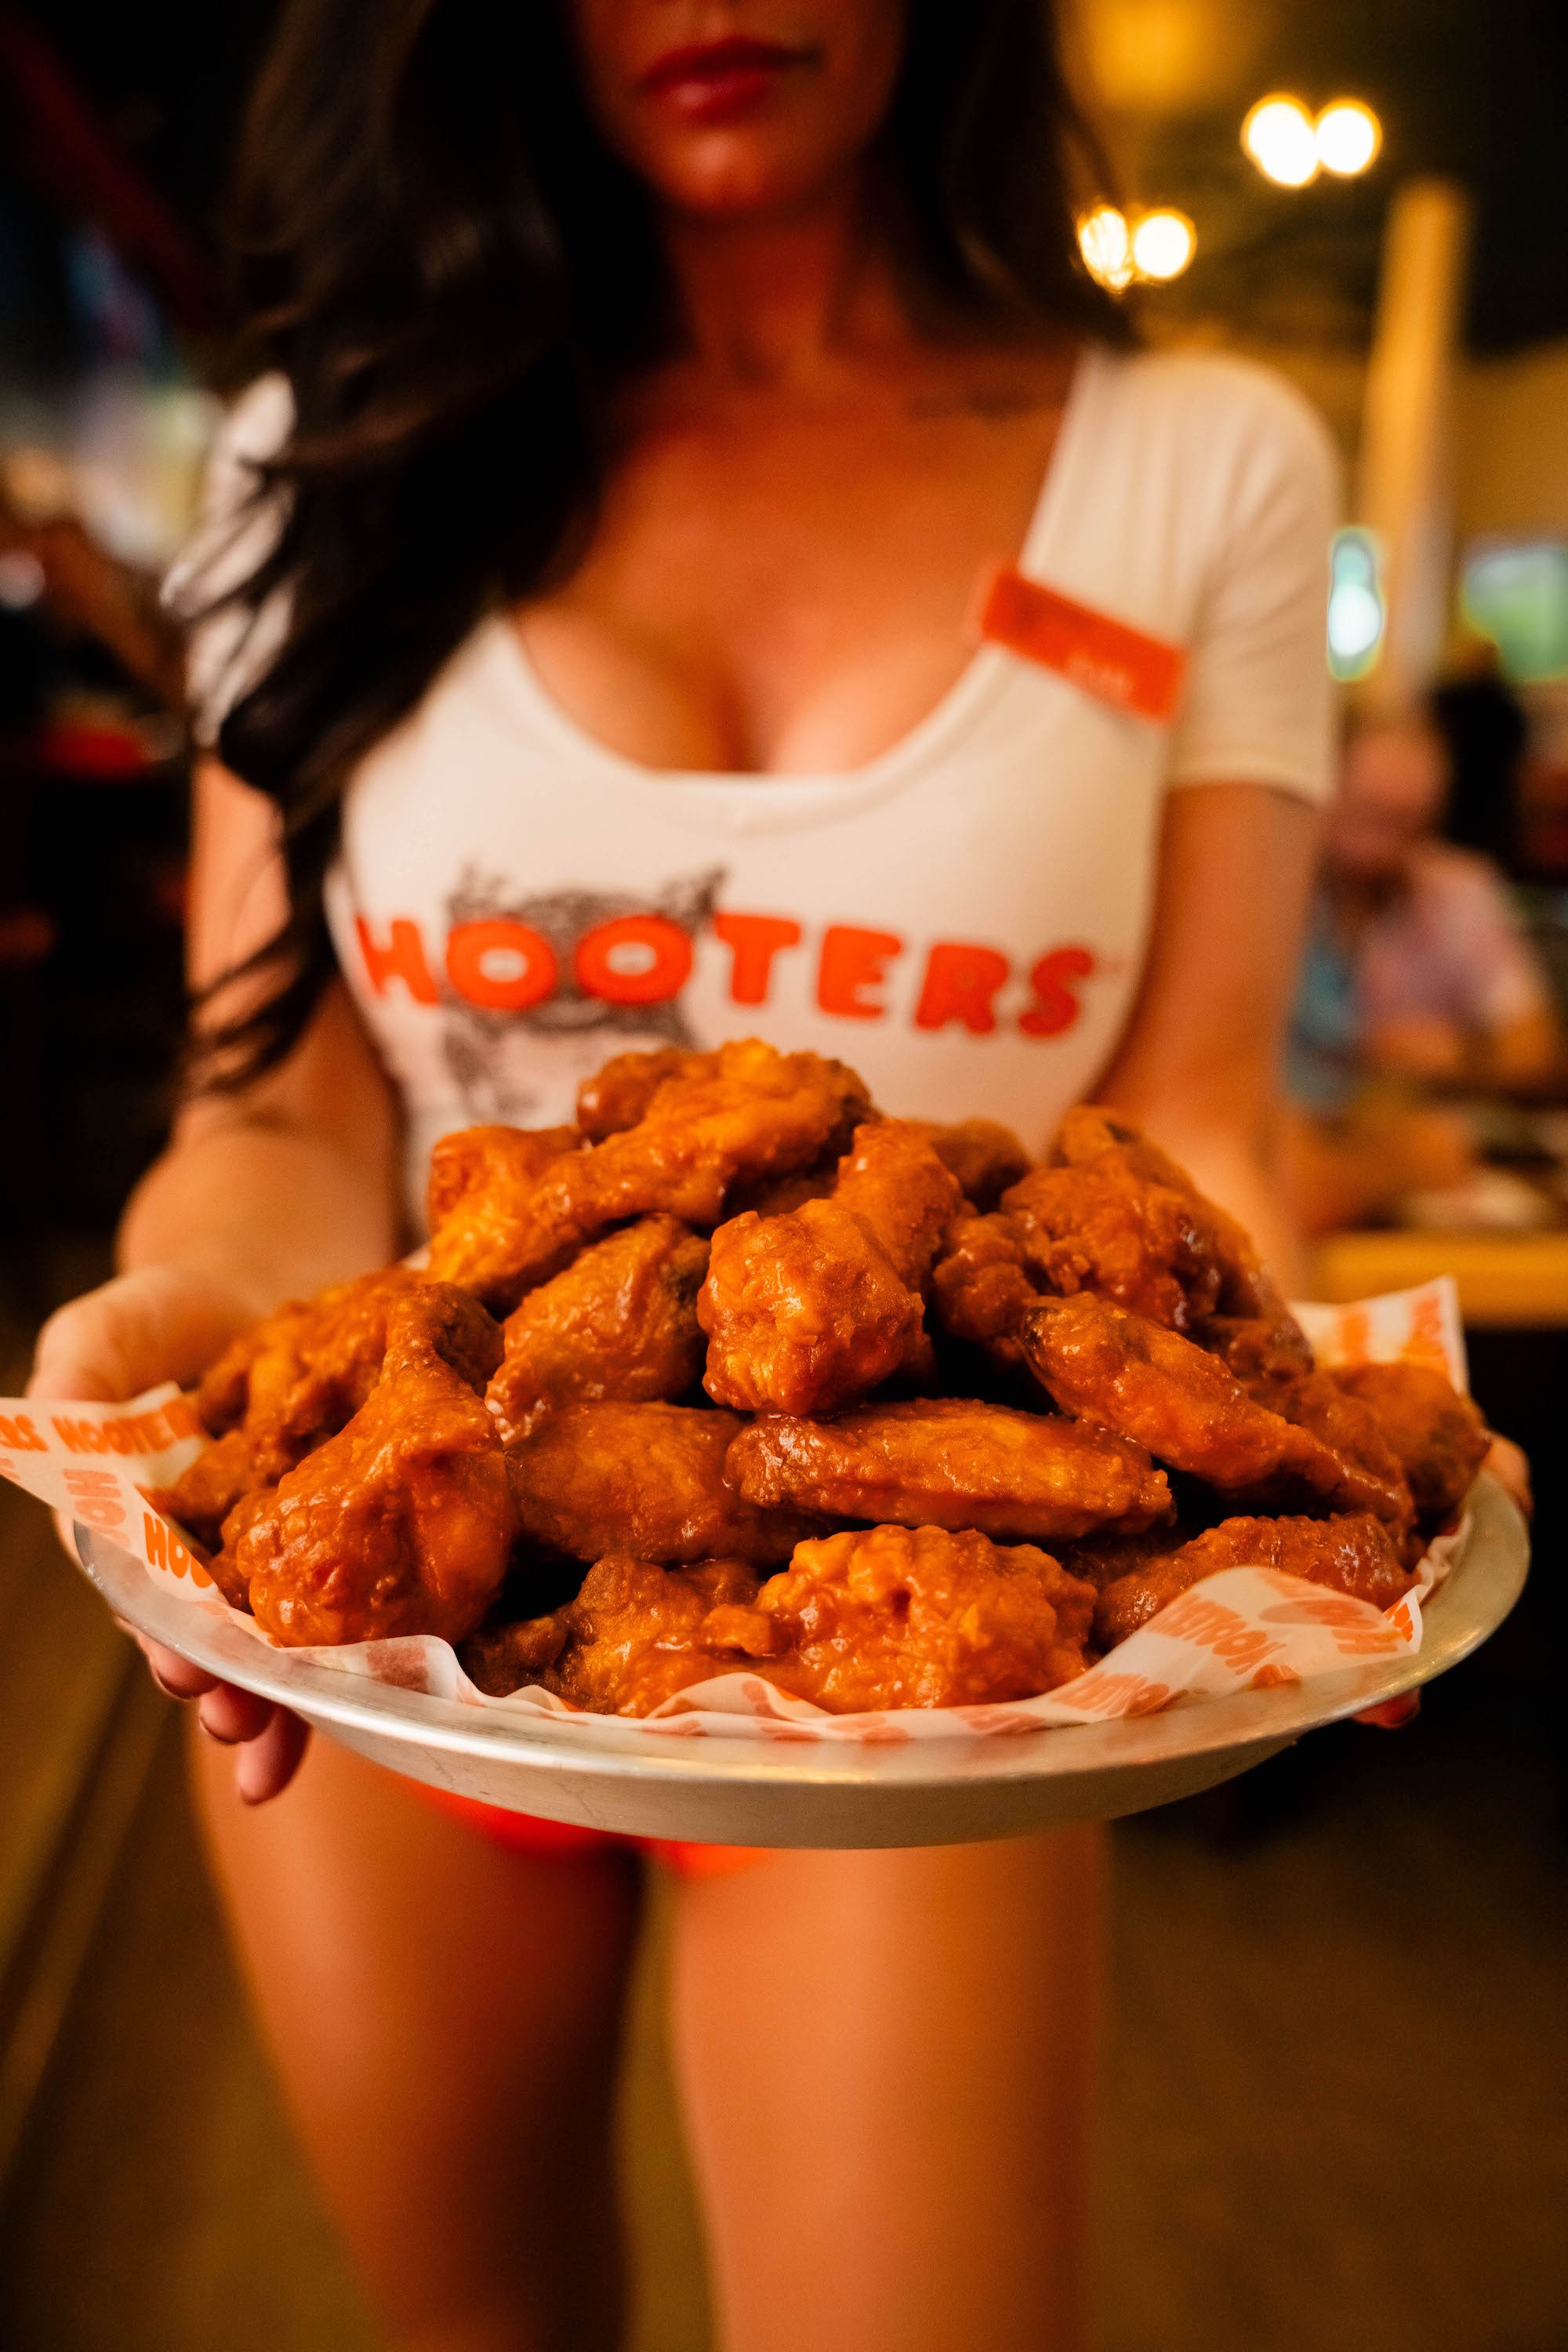 All you can eat wings at hooters.JPG